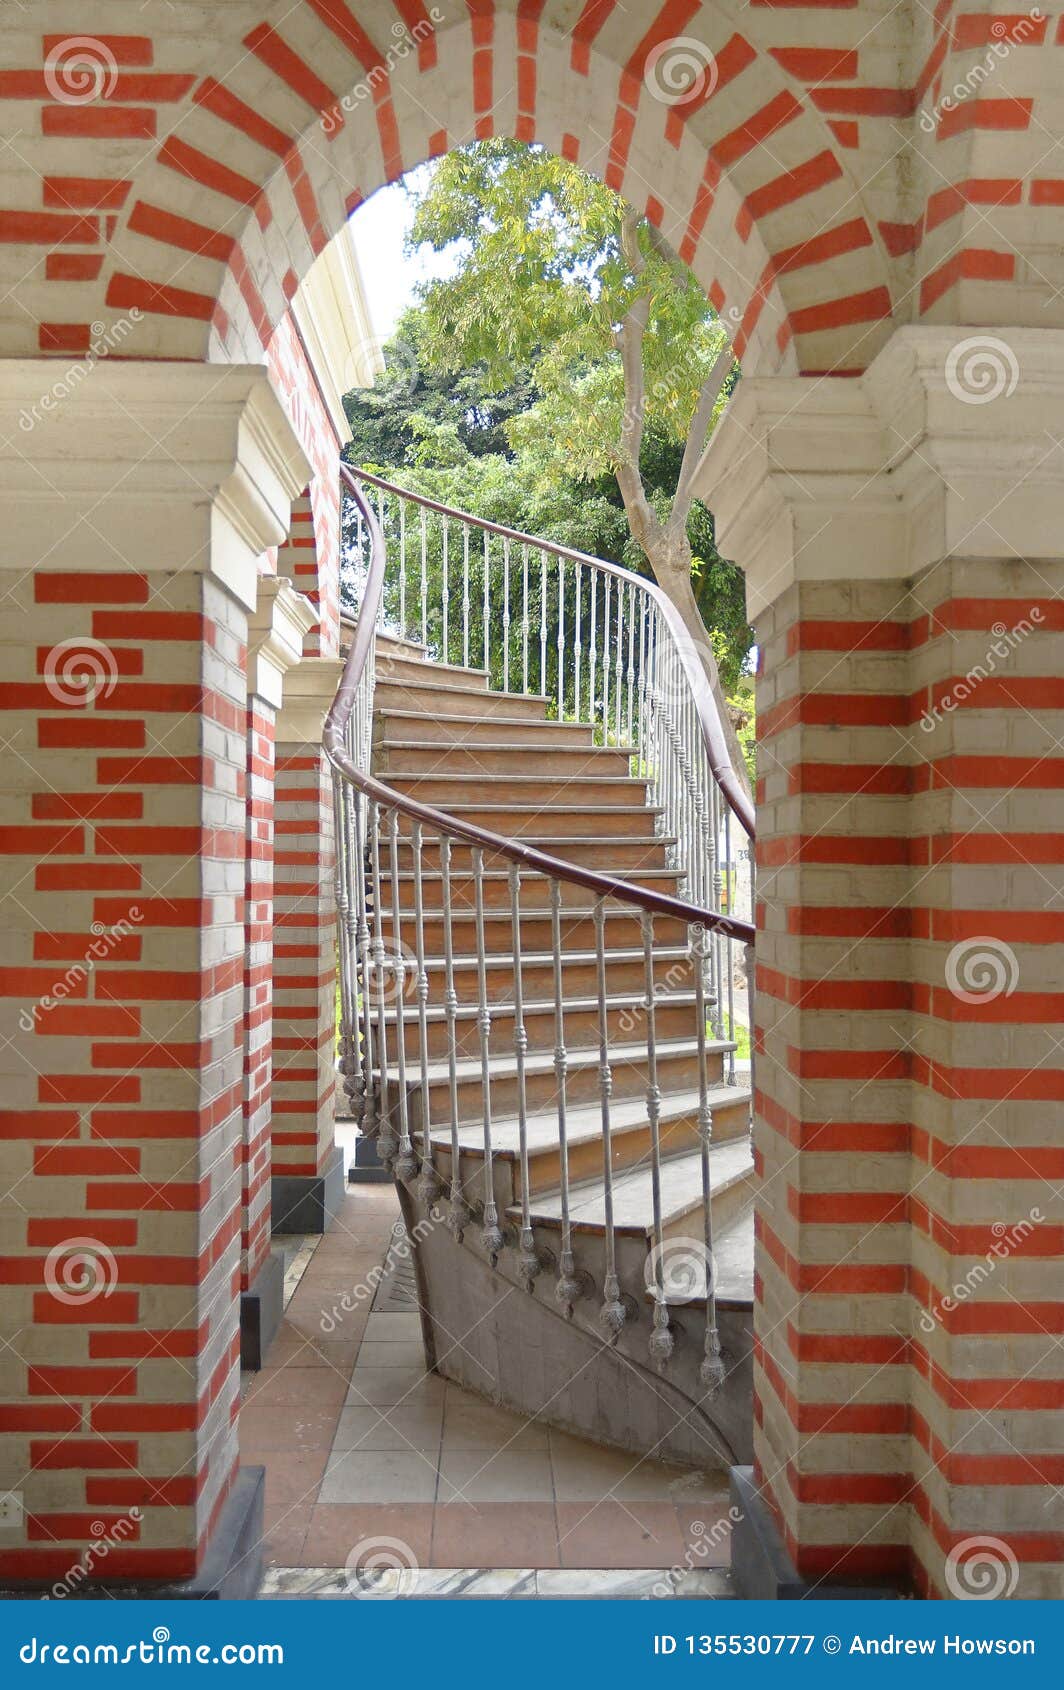 victorian style stairs. reserve park, lima, peru